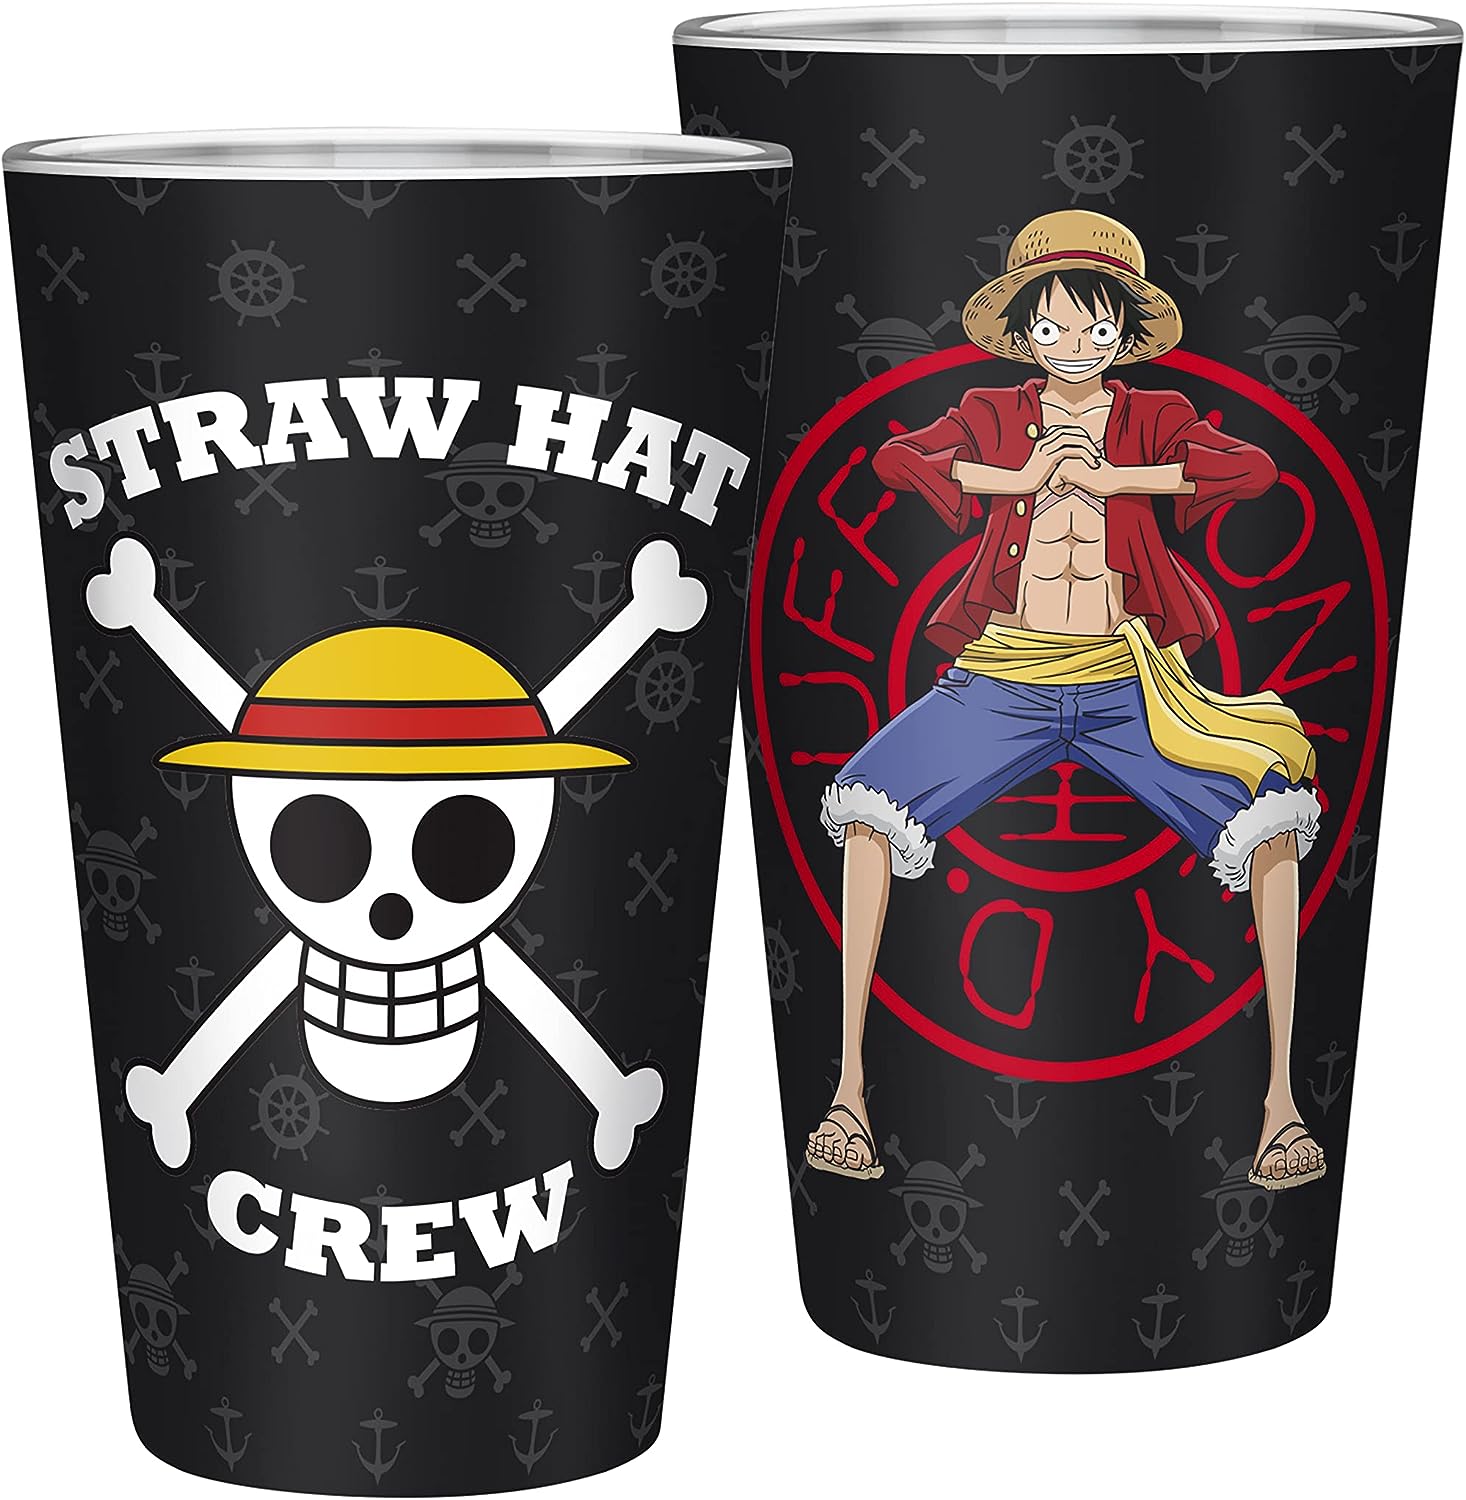 https://cdn.shopify.com/s/files/1/0586/3551/8122/products/one-piece-straw-hat-jolly-roger-crew-mug-notepad-pin-gift-set-abypck197-us-601868.jpg?v=1694496778&width=1466